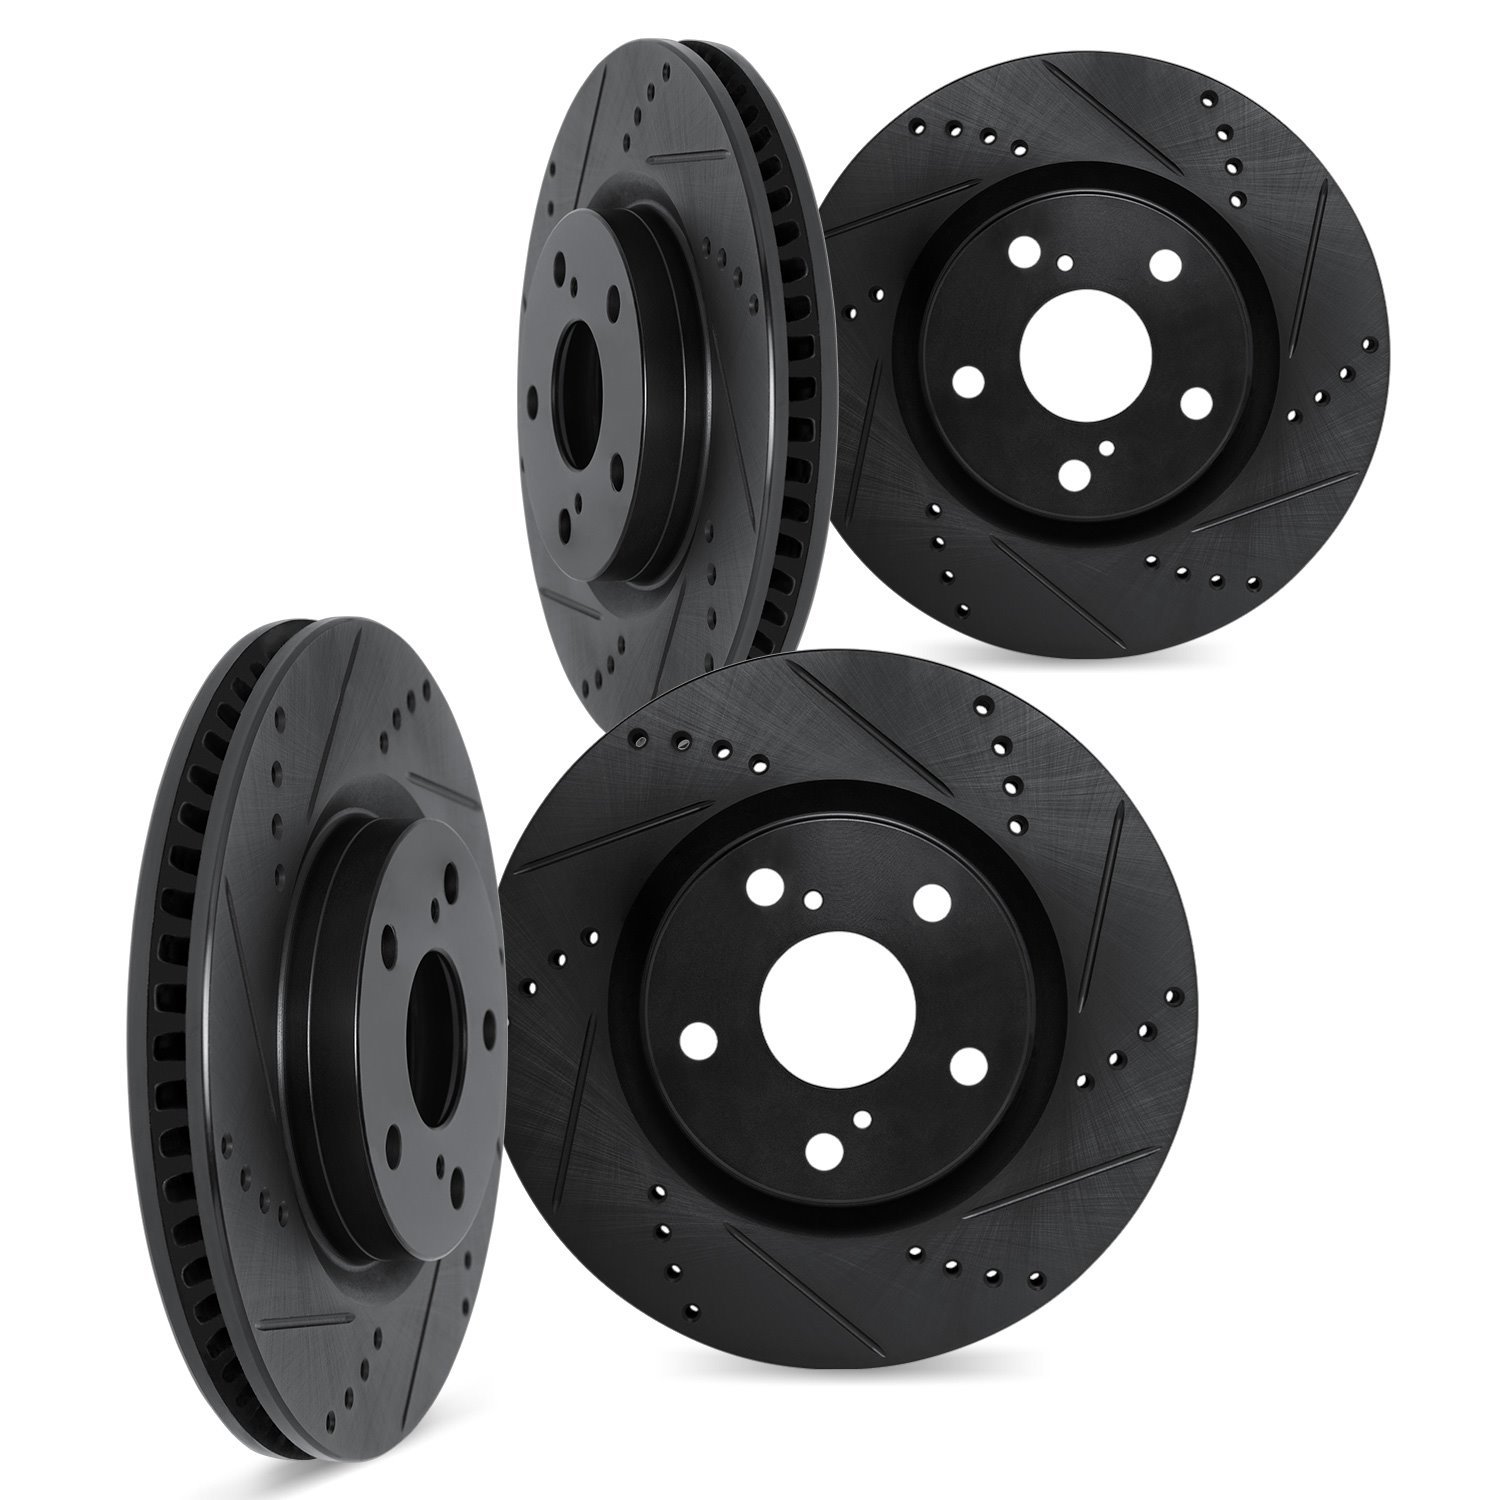 8004-68004 Drilled/Slotted Brake Rotors [Black], 1993-1997 Infiniti/Nissan, Position: Front and Rear